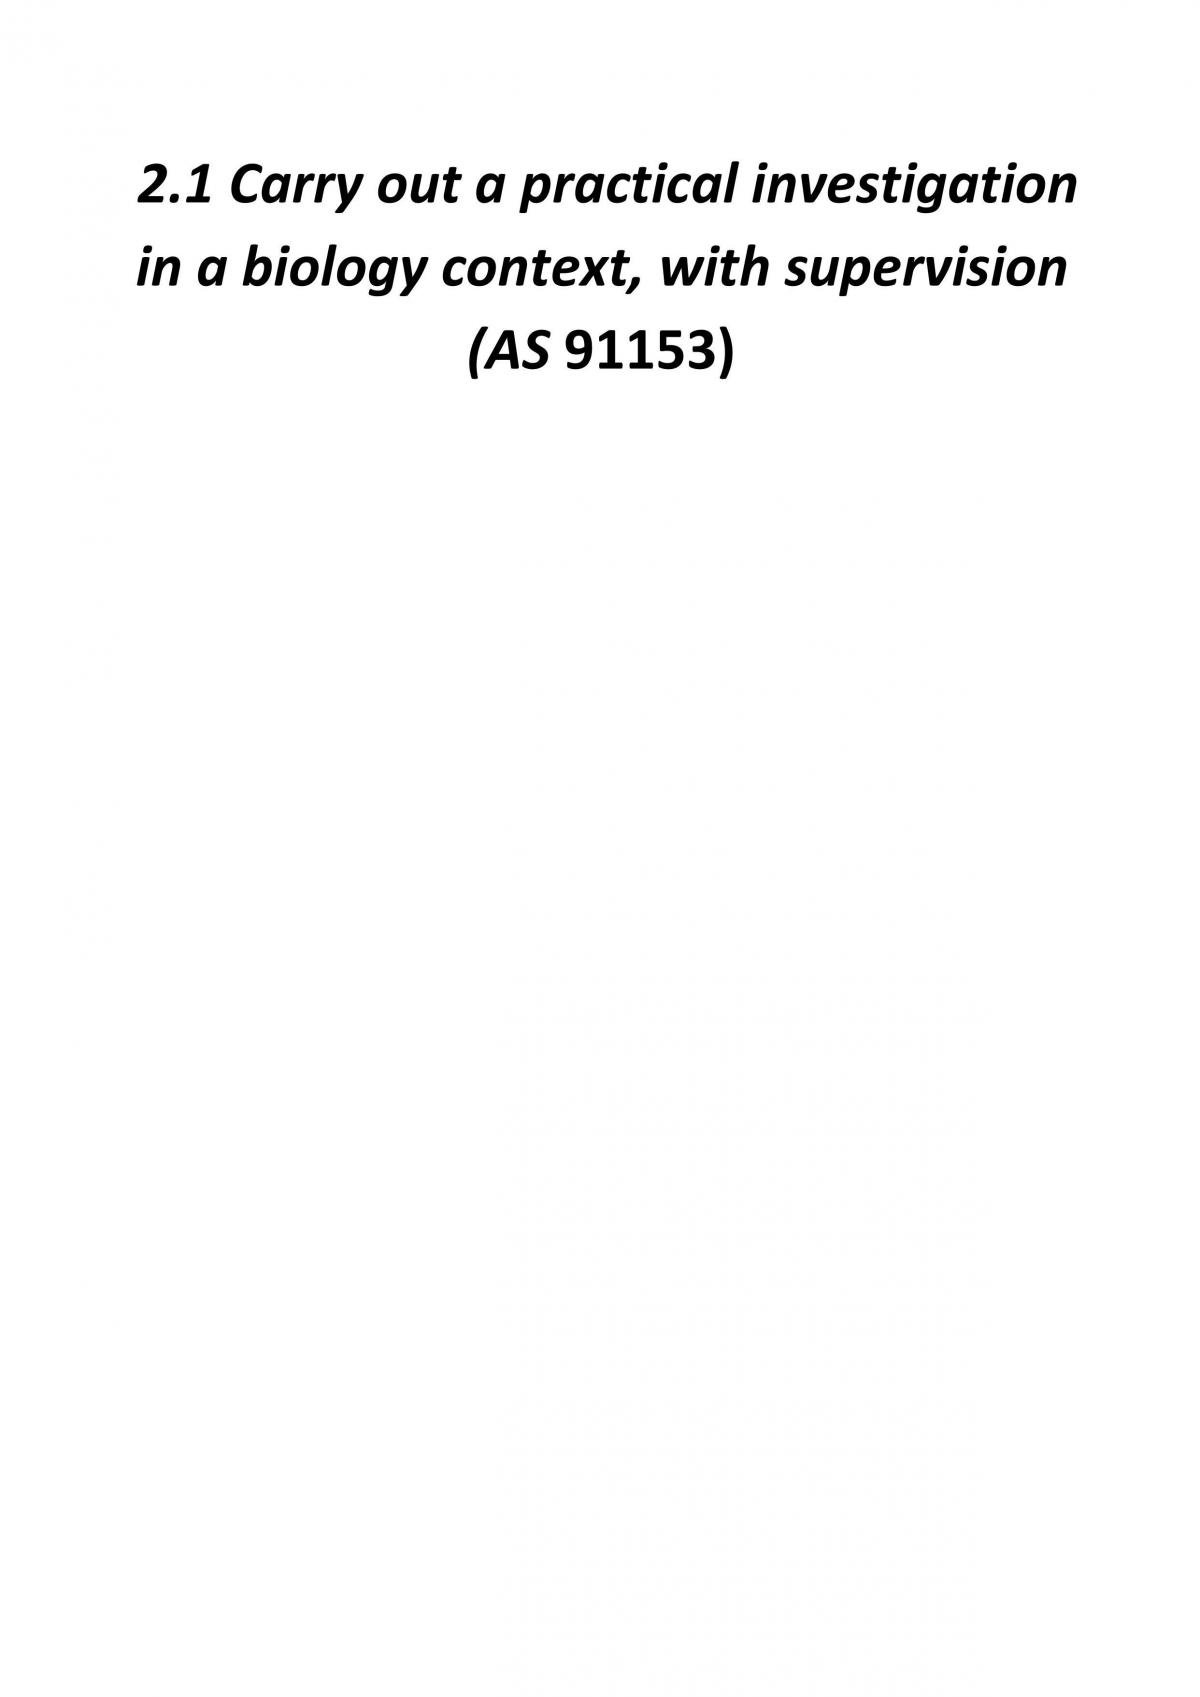 2.1 Carry our a practical investigation in a biology context, with supervision - Page 1